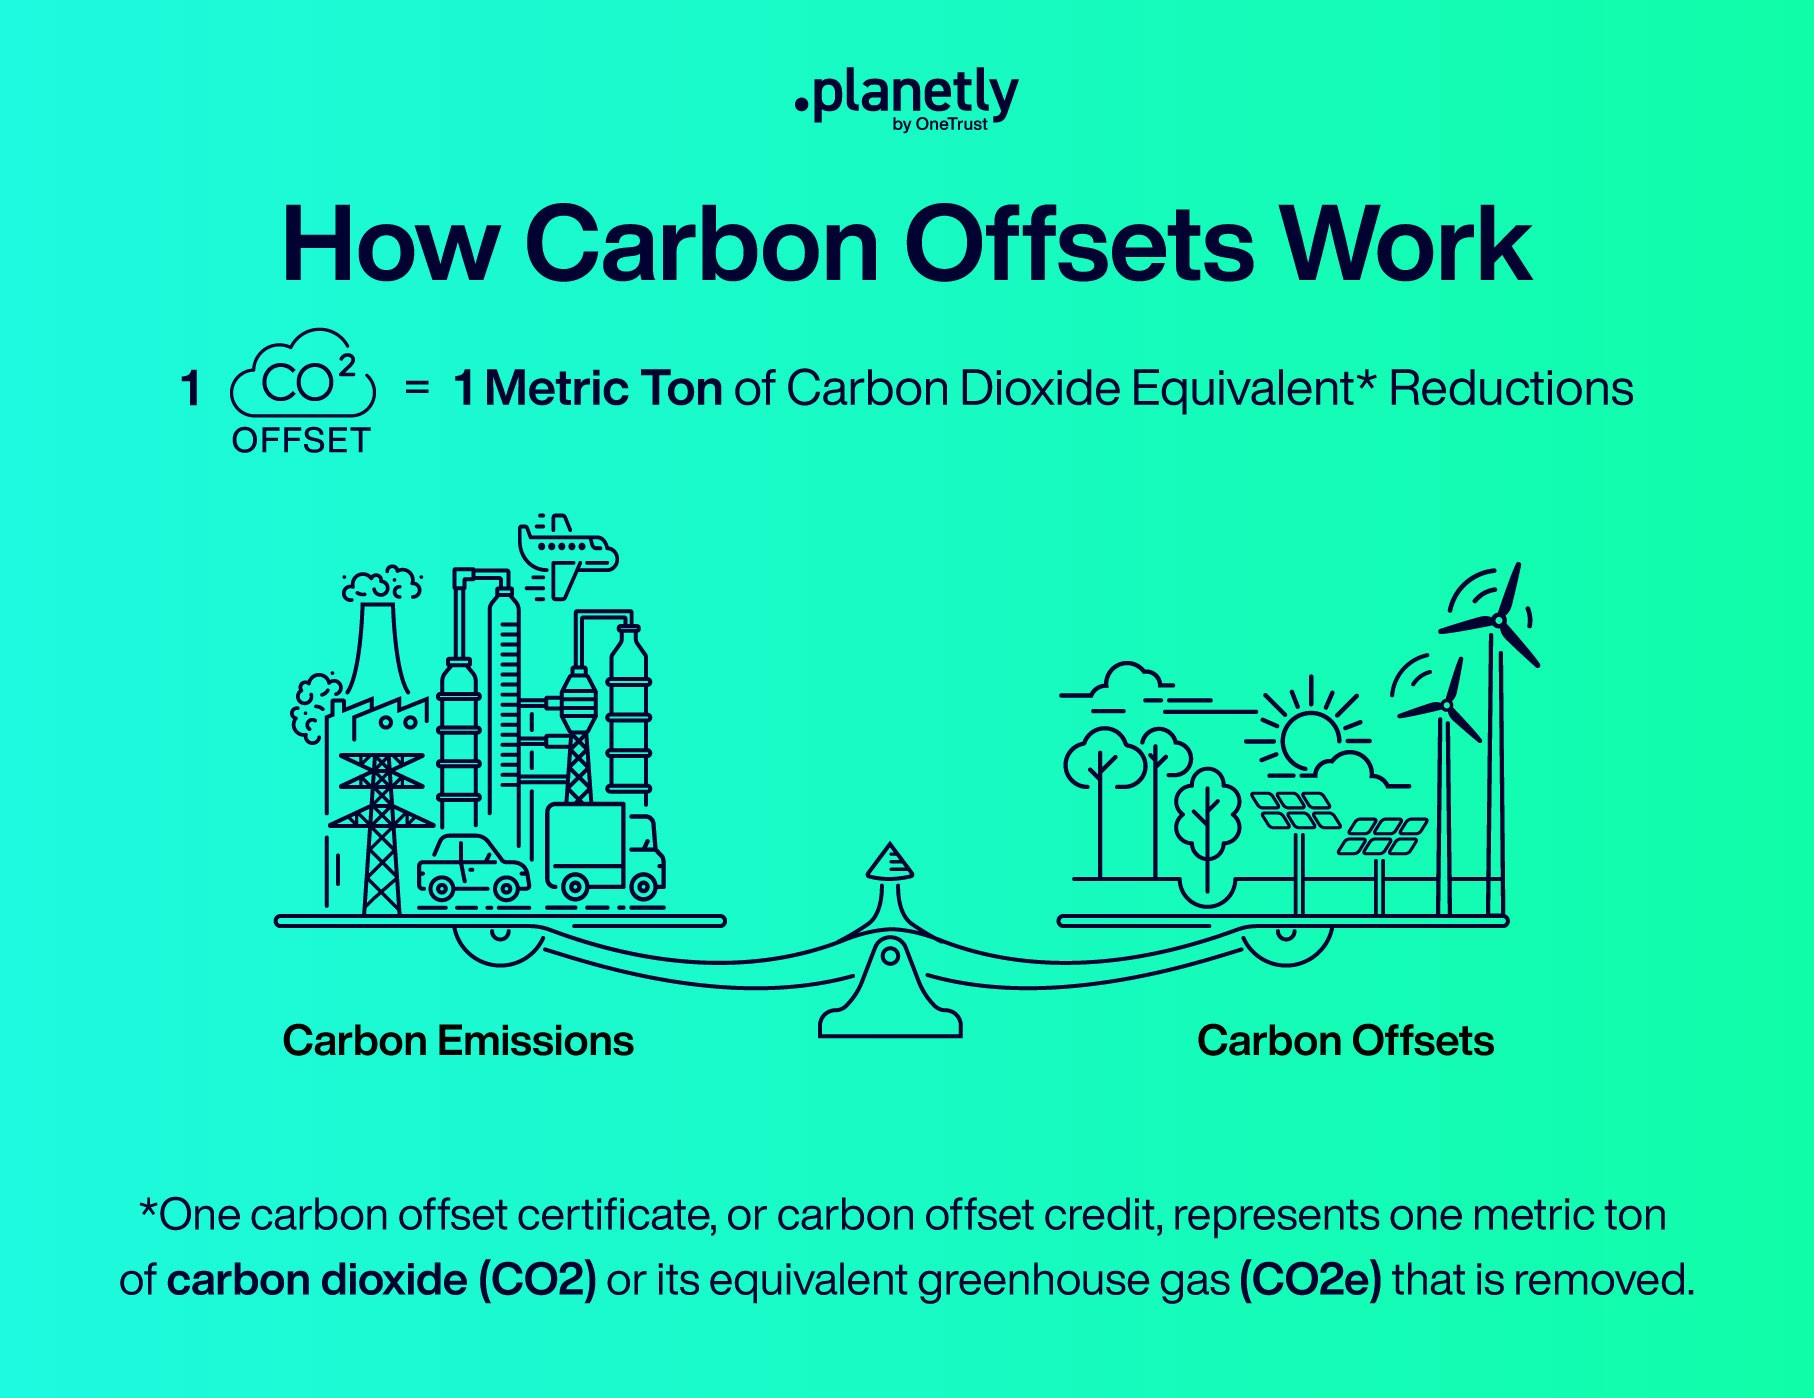 How carbon offsets work